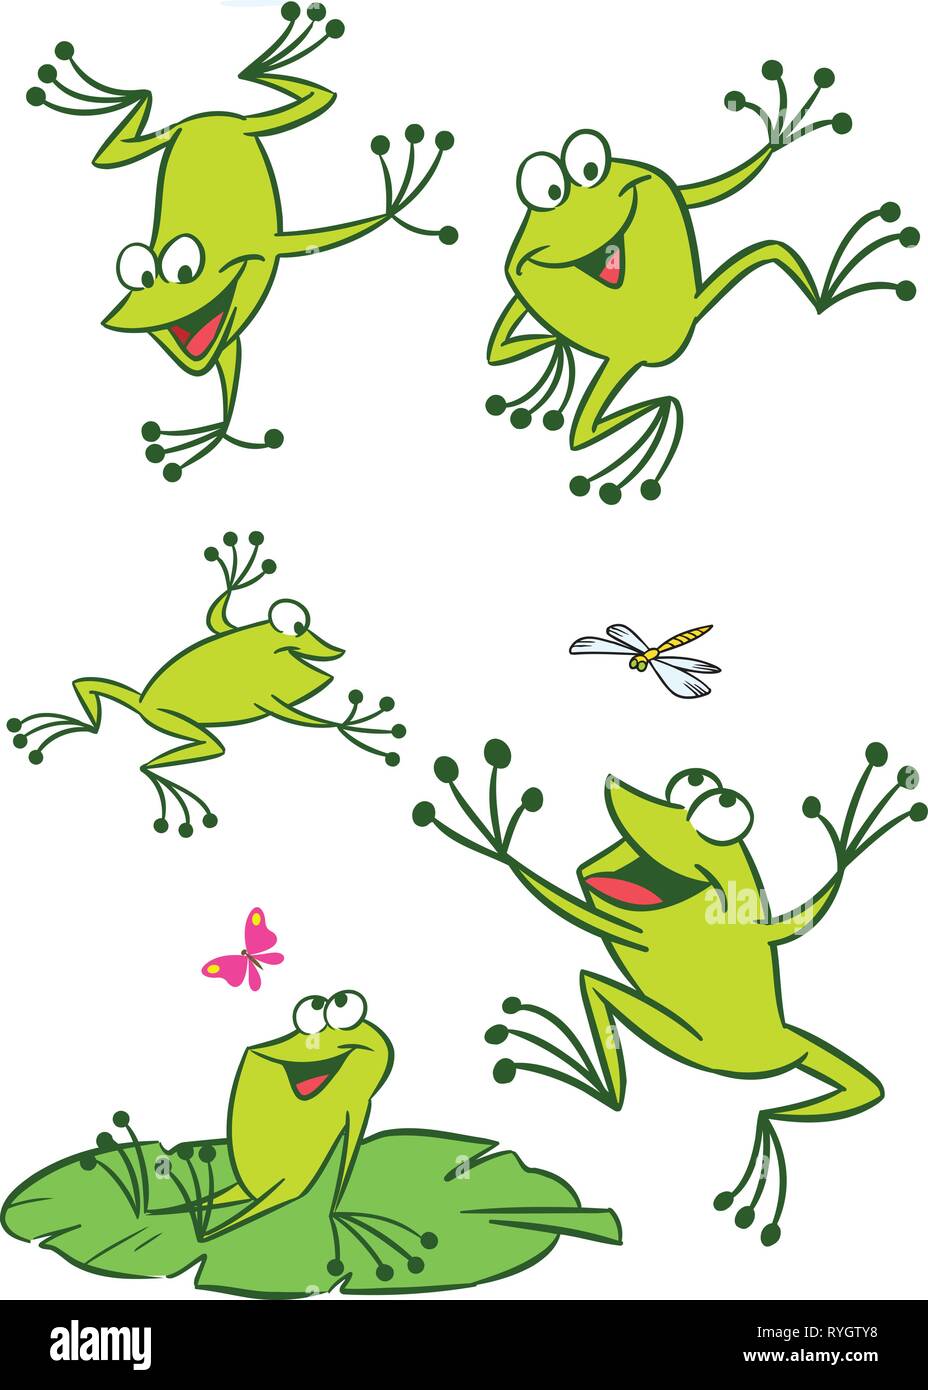 Image result for many croaking frogs cartoons